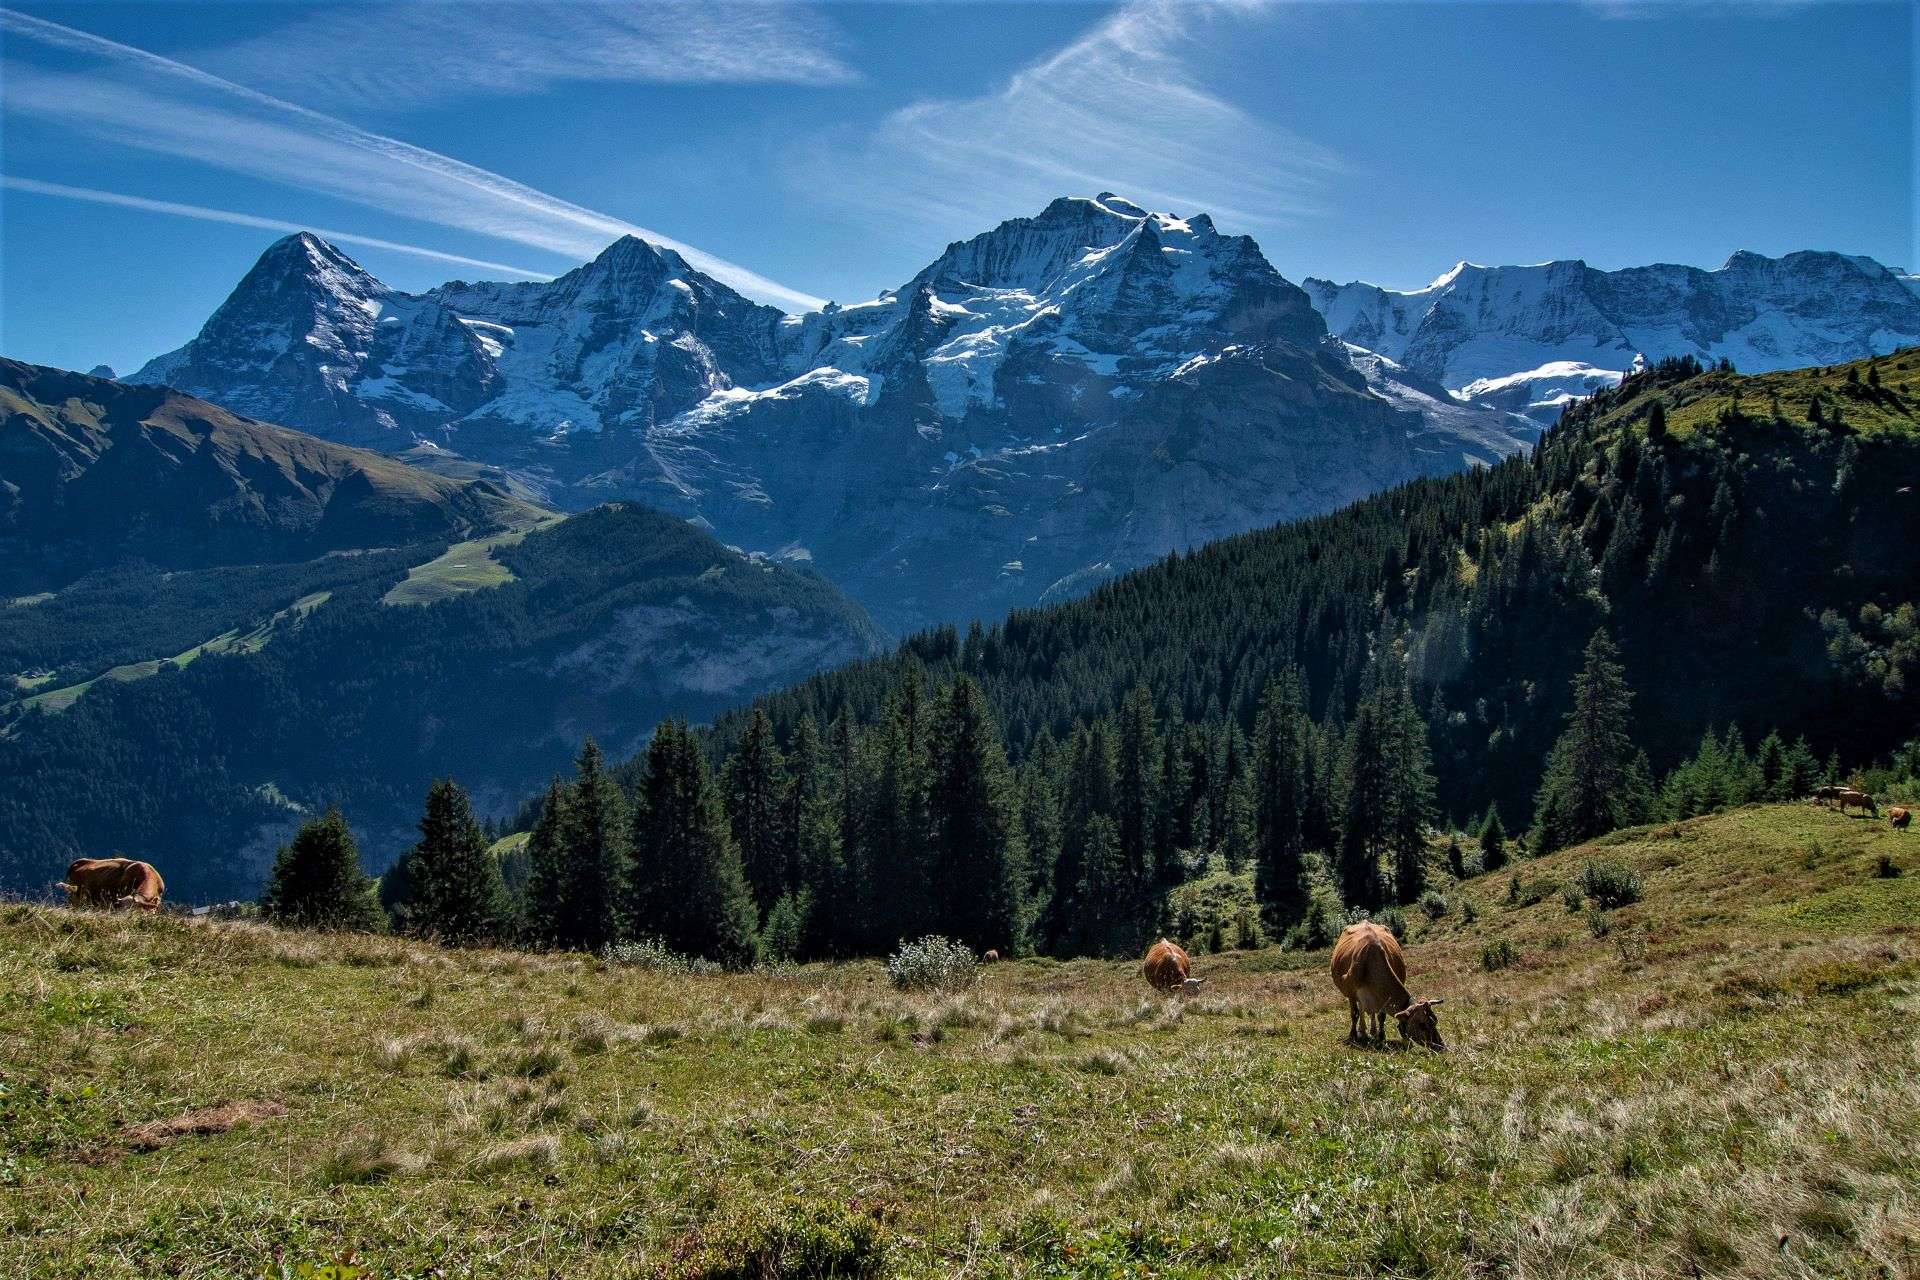 A view of the mountains Eiger, Monch, and Jungfrau with livestock grazing.